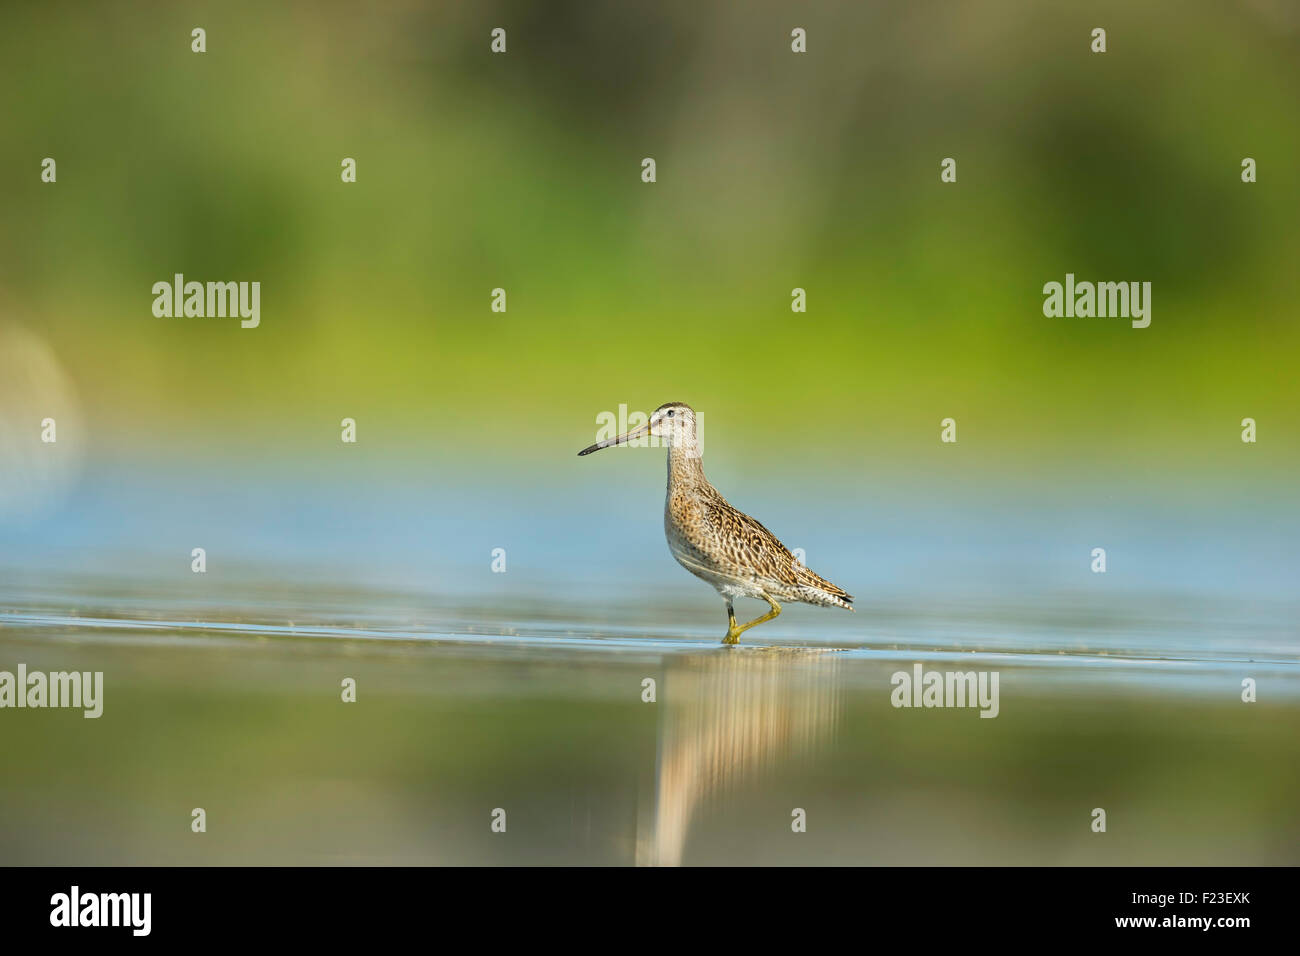 Short-billed Dowitcher, a shorebird, standing in a shallow water at Jamaica Bay Wildlife Refuge , New York City, USA Stock Photo